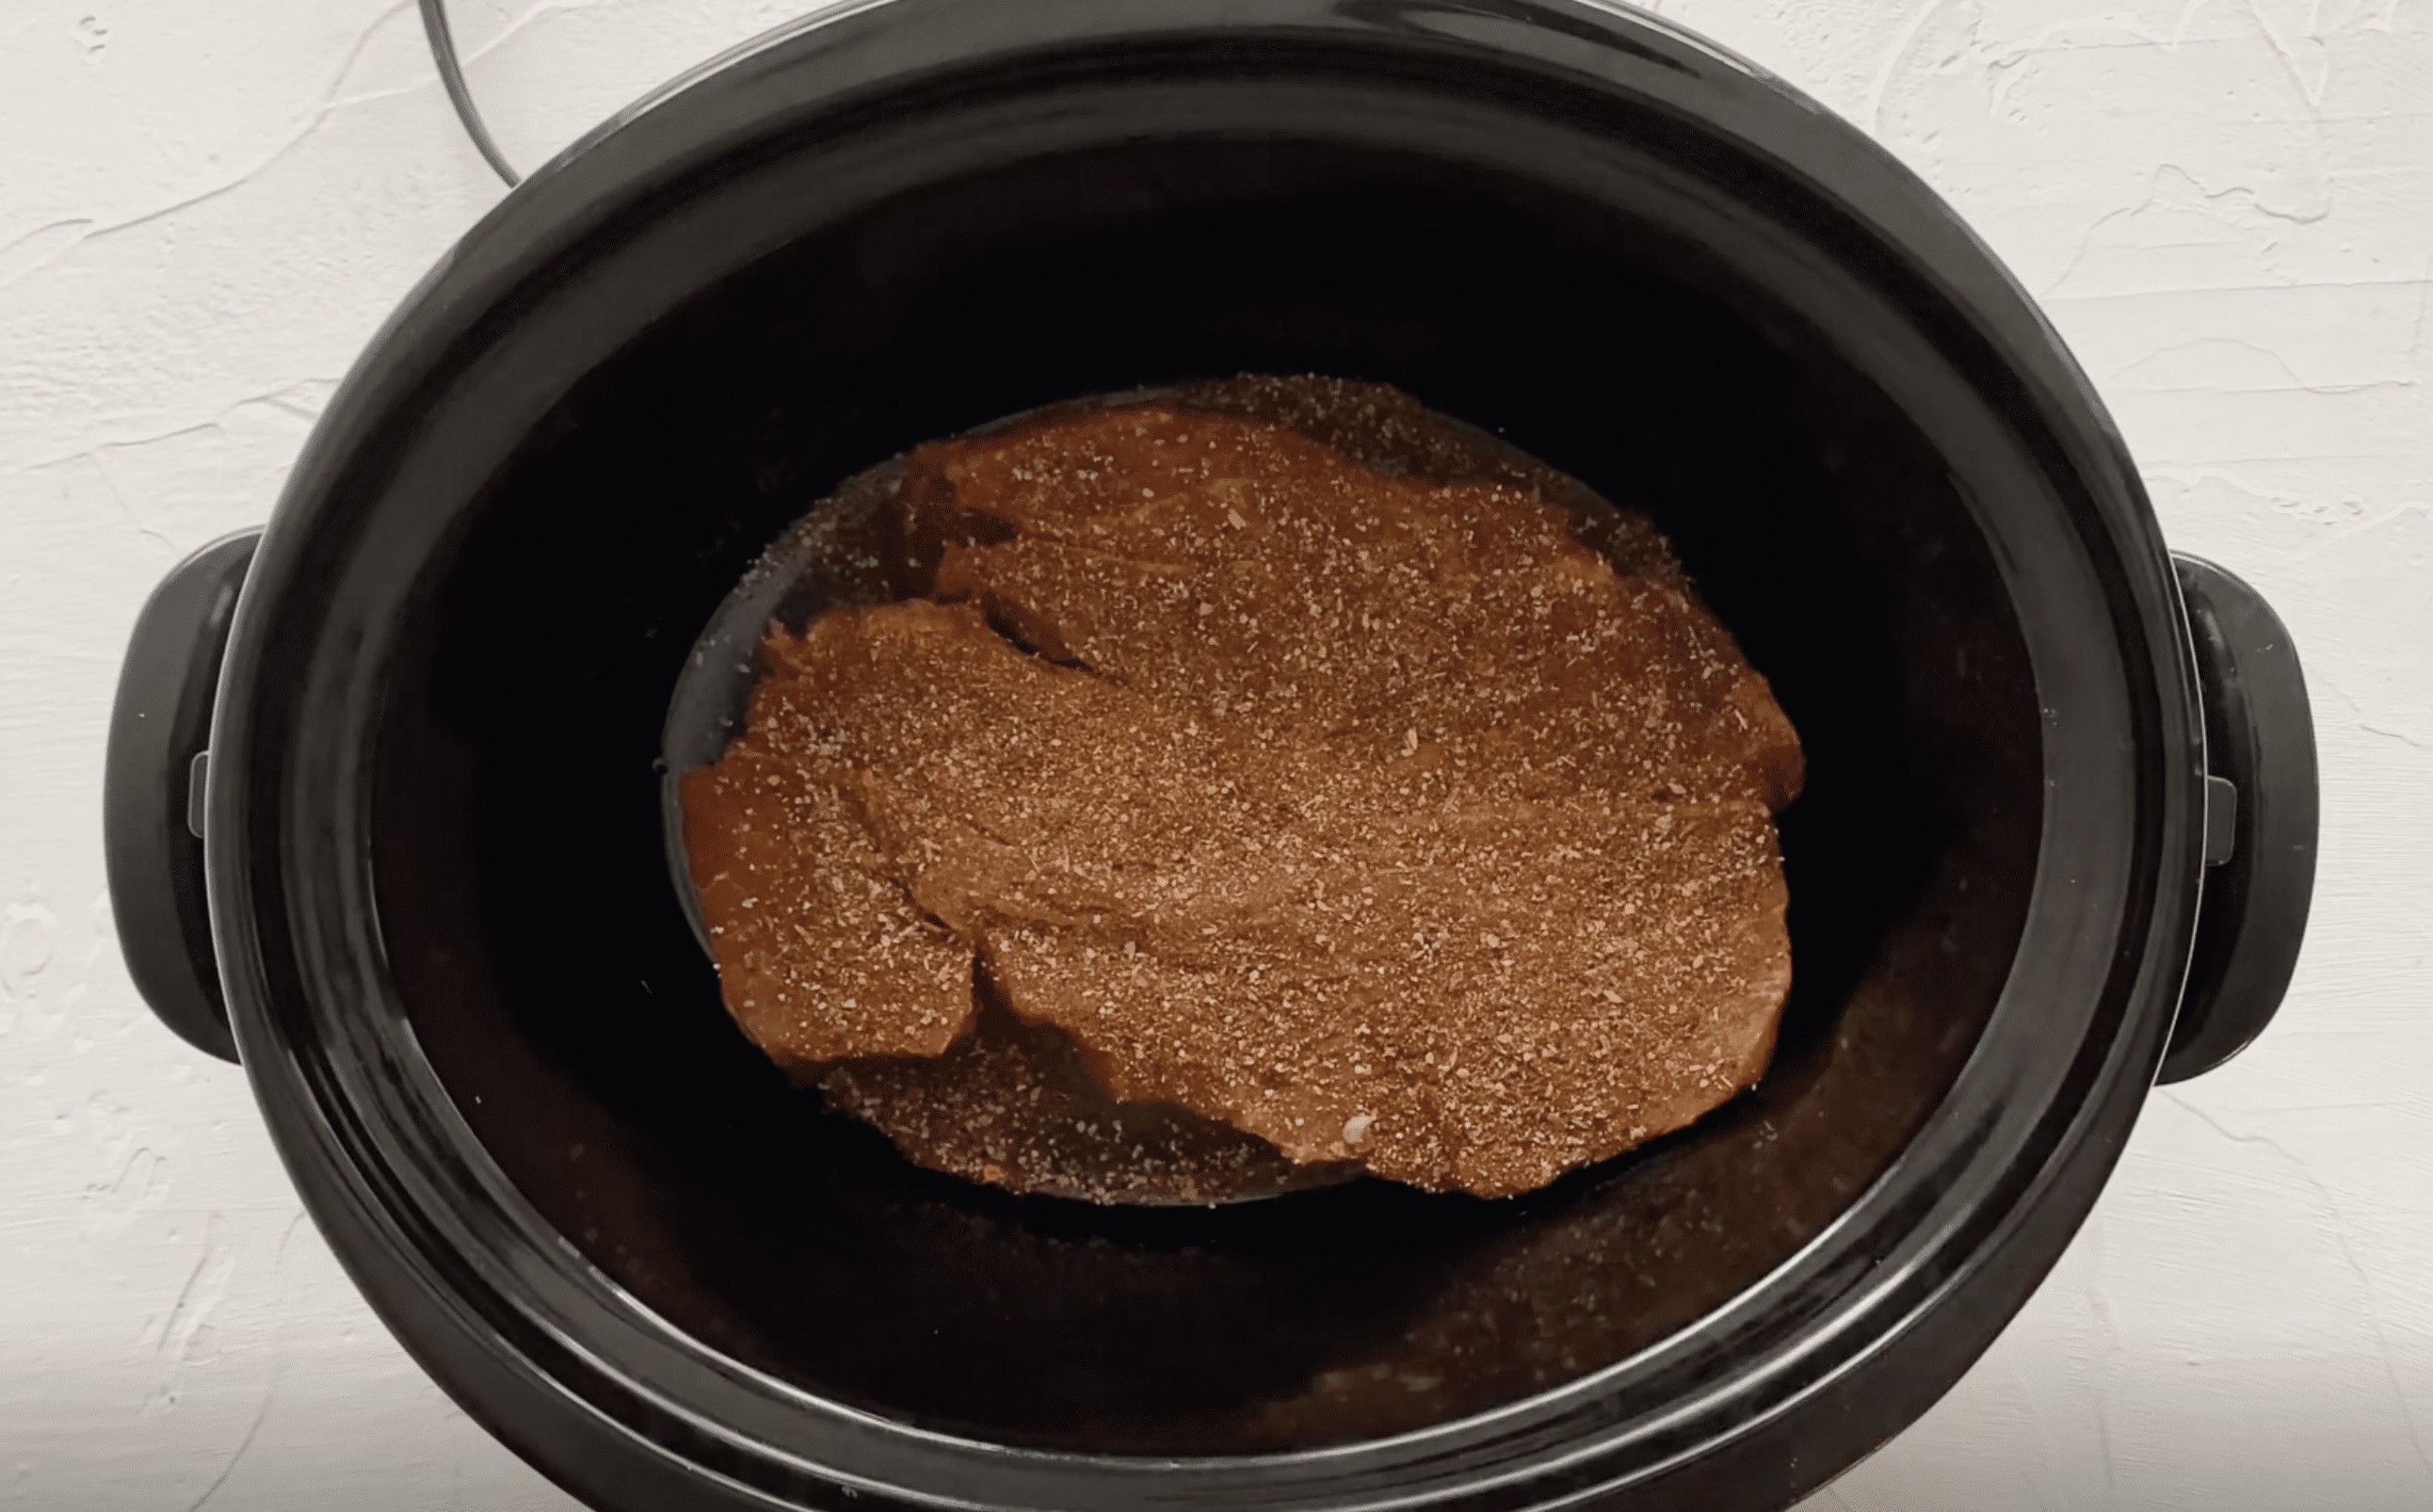 An uncooked chuck roast with seasonings on it in a slow cooker.